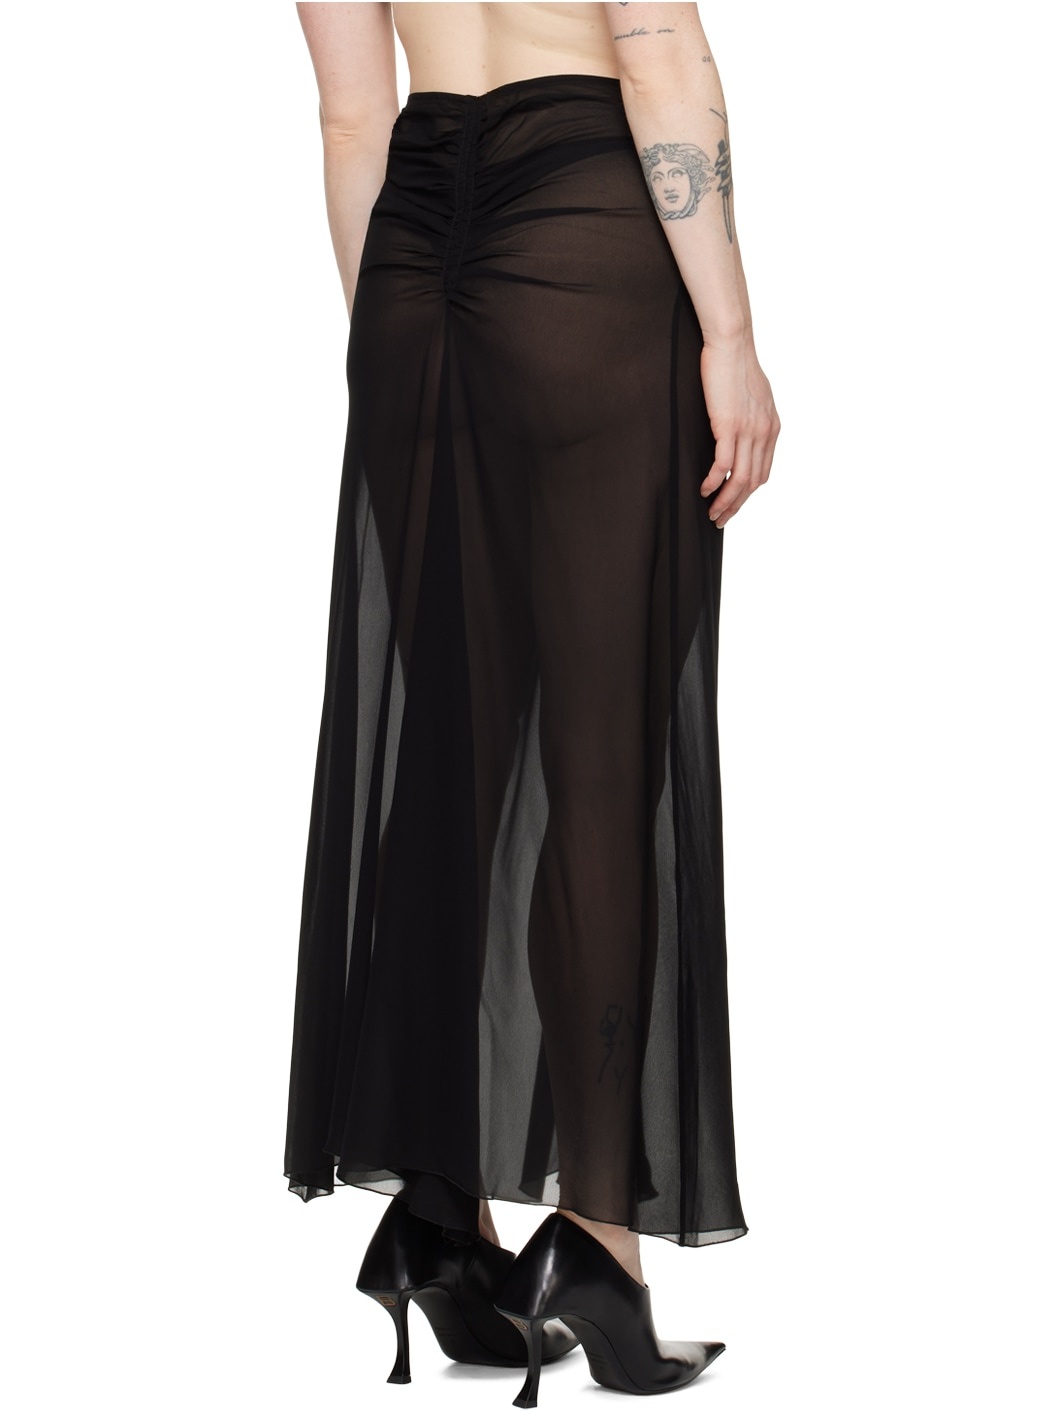 Black Ruched Maxi Skirt - 3